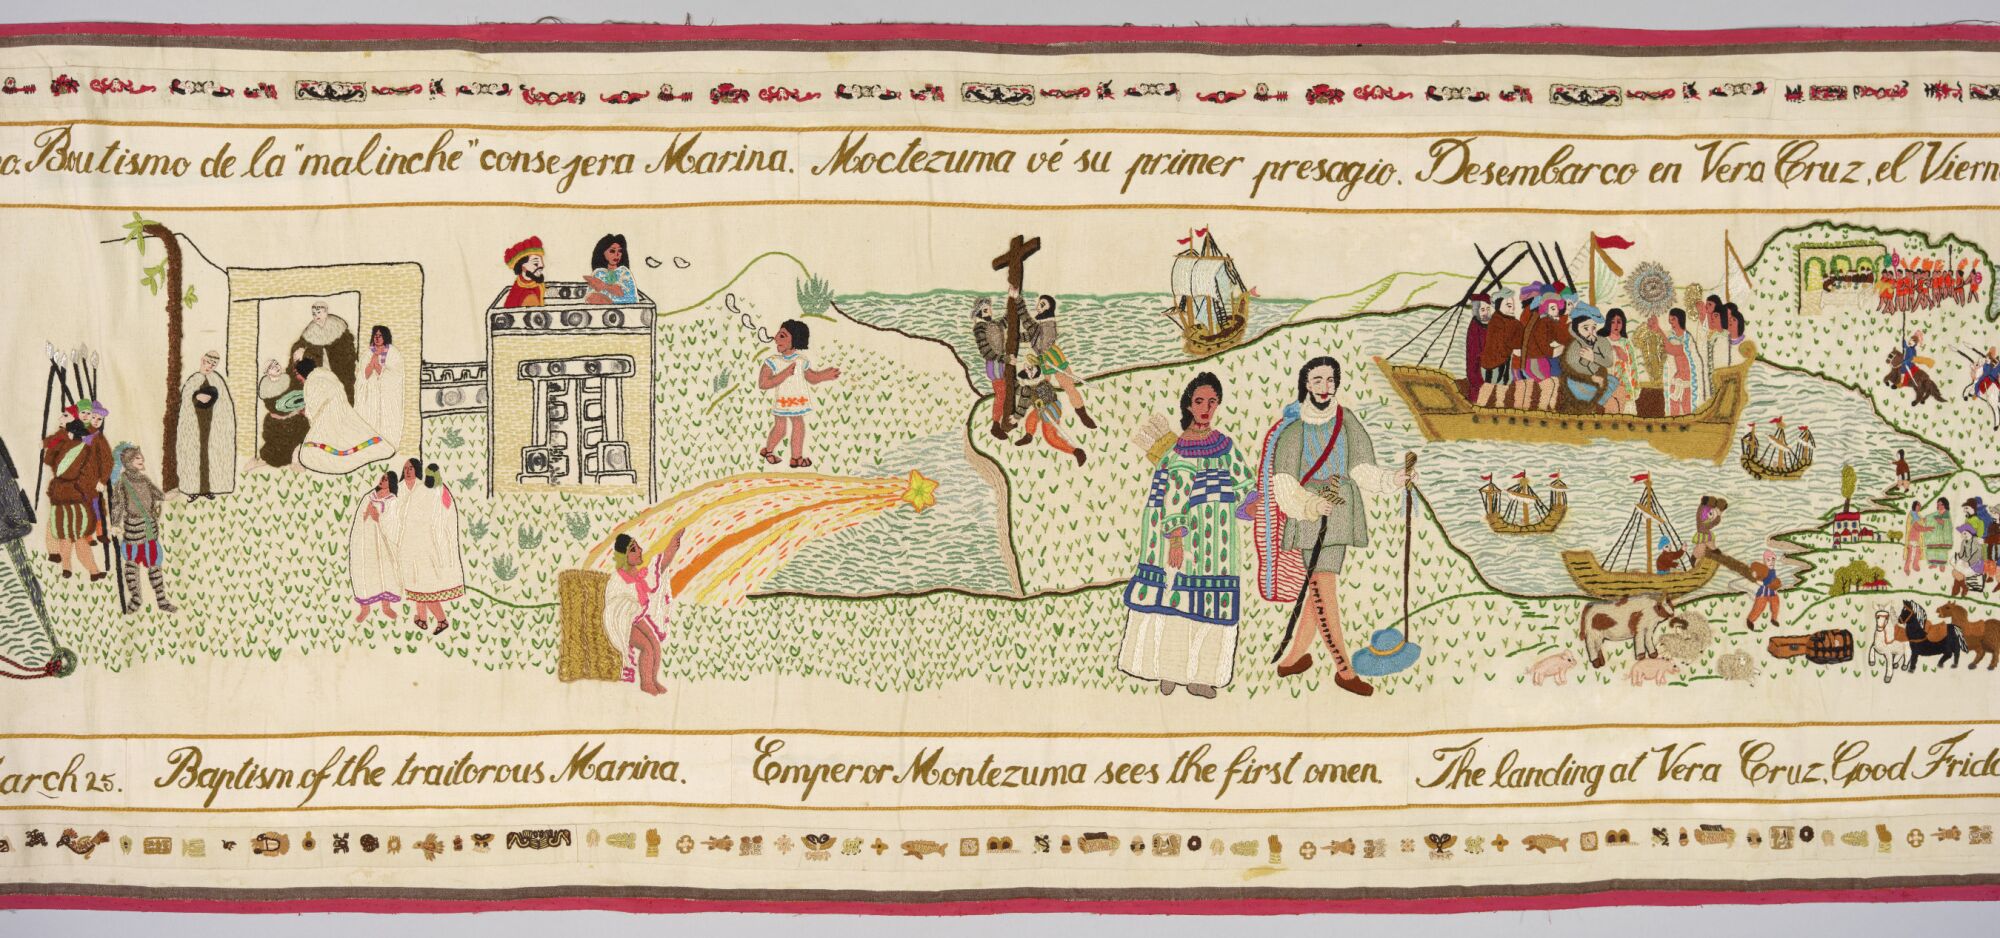 A piece of a hand-embroidered tapestry shows various historical scenes, including Malinche walking with Hernán Cortés